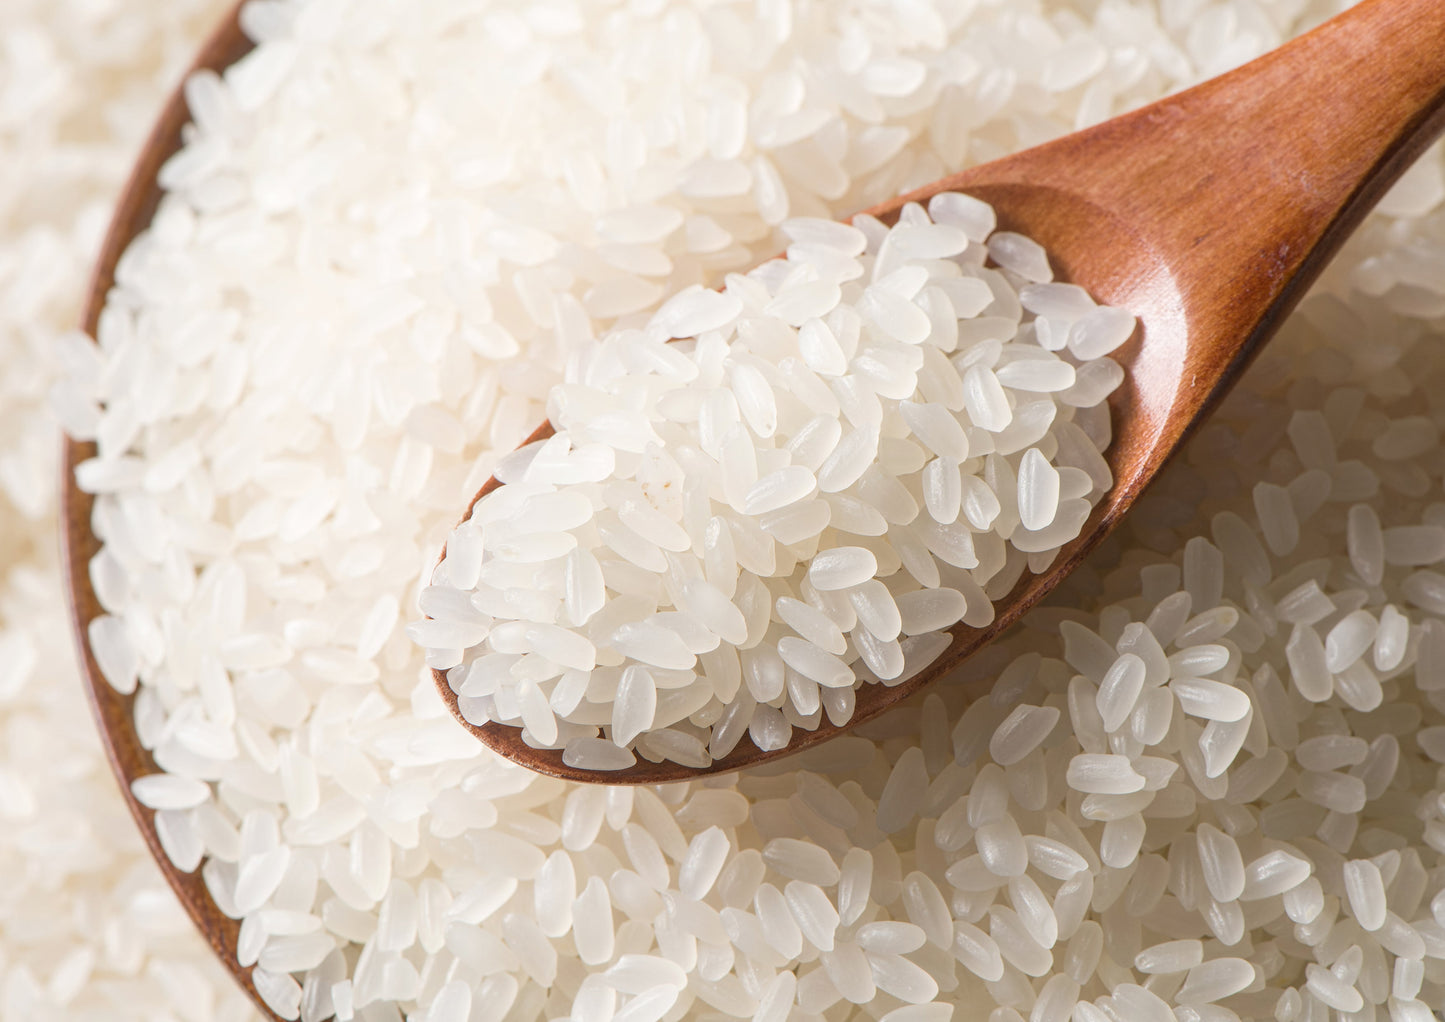 Short-Grain White Rice — Premium Japanese Style Short-Grain Rice, Perfectly Sticky, Vegan, Kosher, Bulk Rice. Easy to Cook. Great as a Side Dish. Great for Sushi, Rice Salads, and Desserts